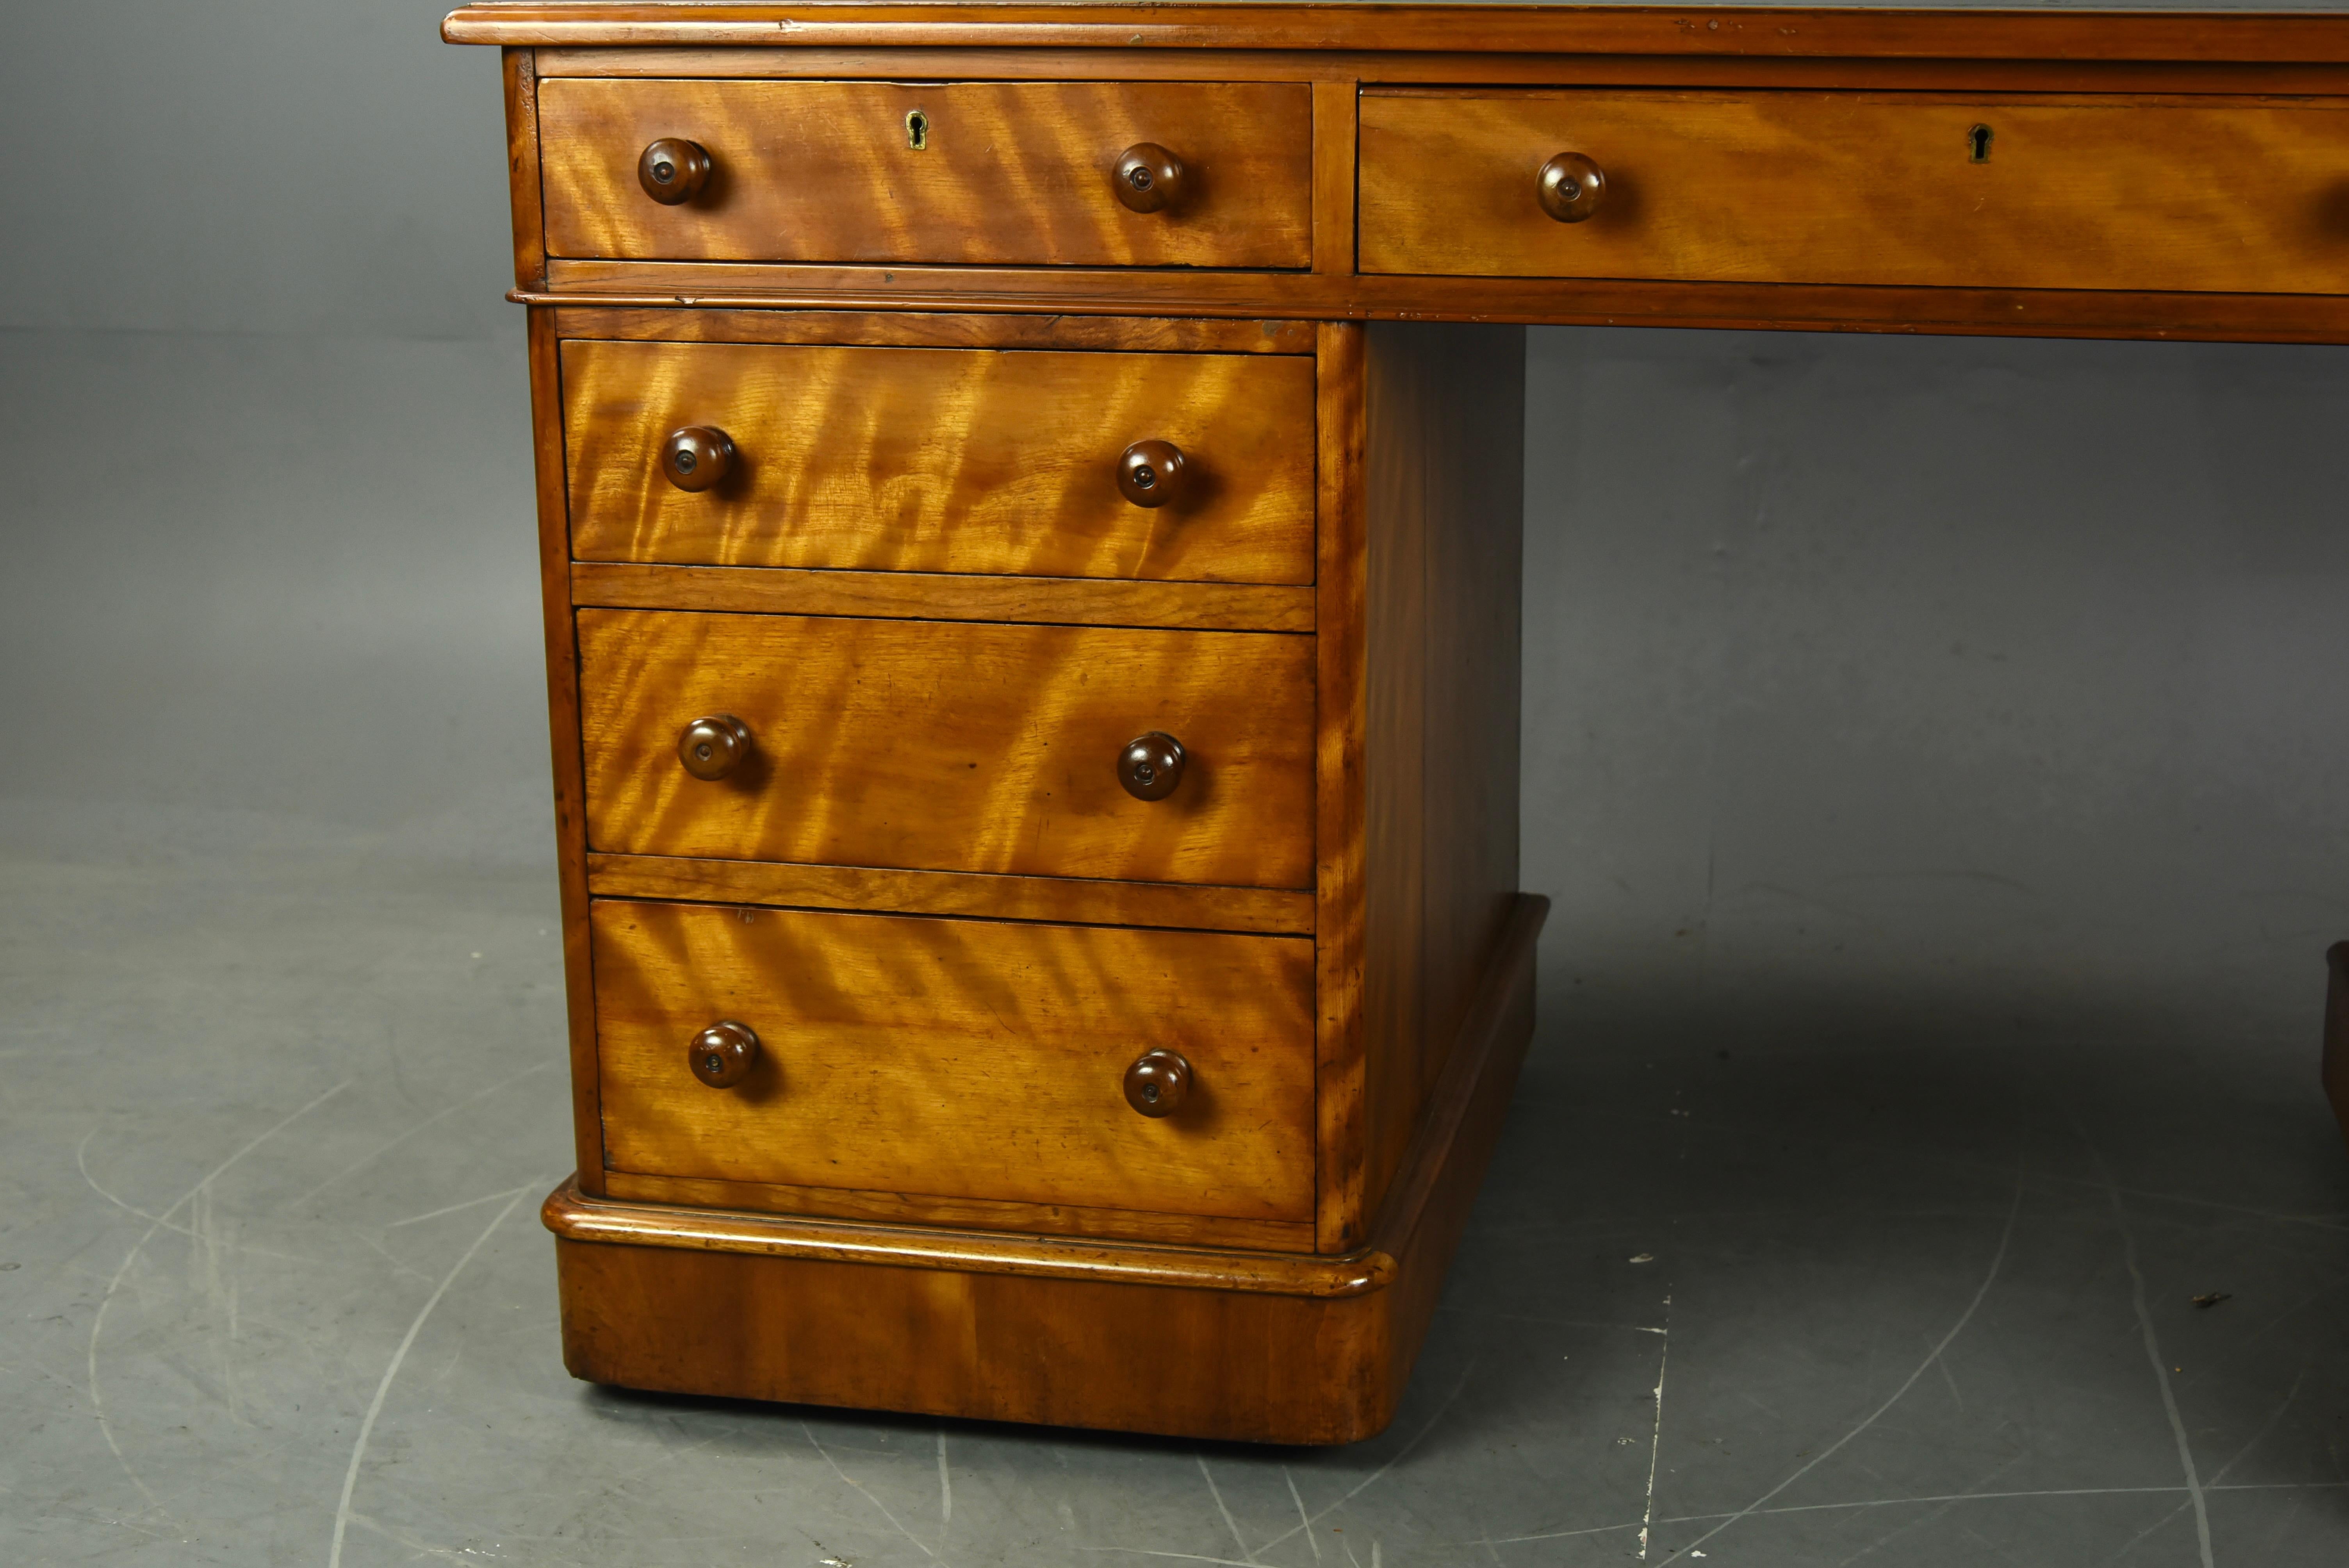 Great quality Victorian Satinwood pedestal desk .
This wonderful Desk has a great colour and grain in beautiful satin wood .It is a very practical size with a good working area 
The desk has 9 drawers that are mahogany lined and slide nice and